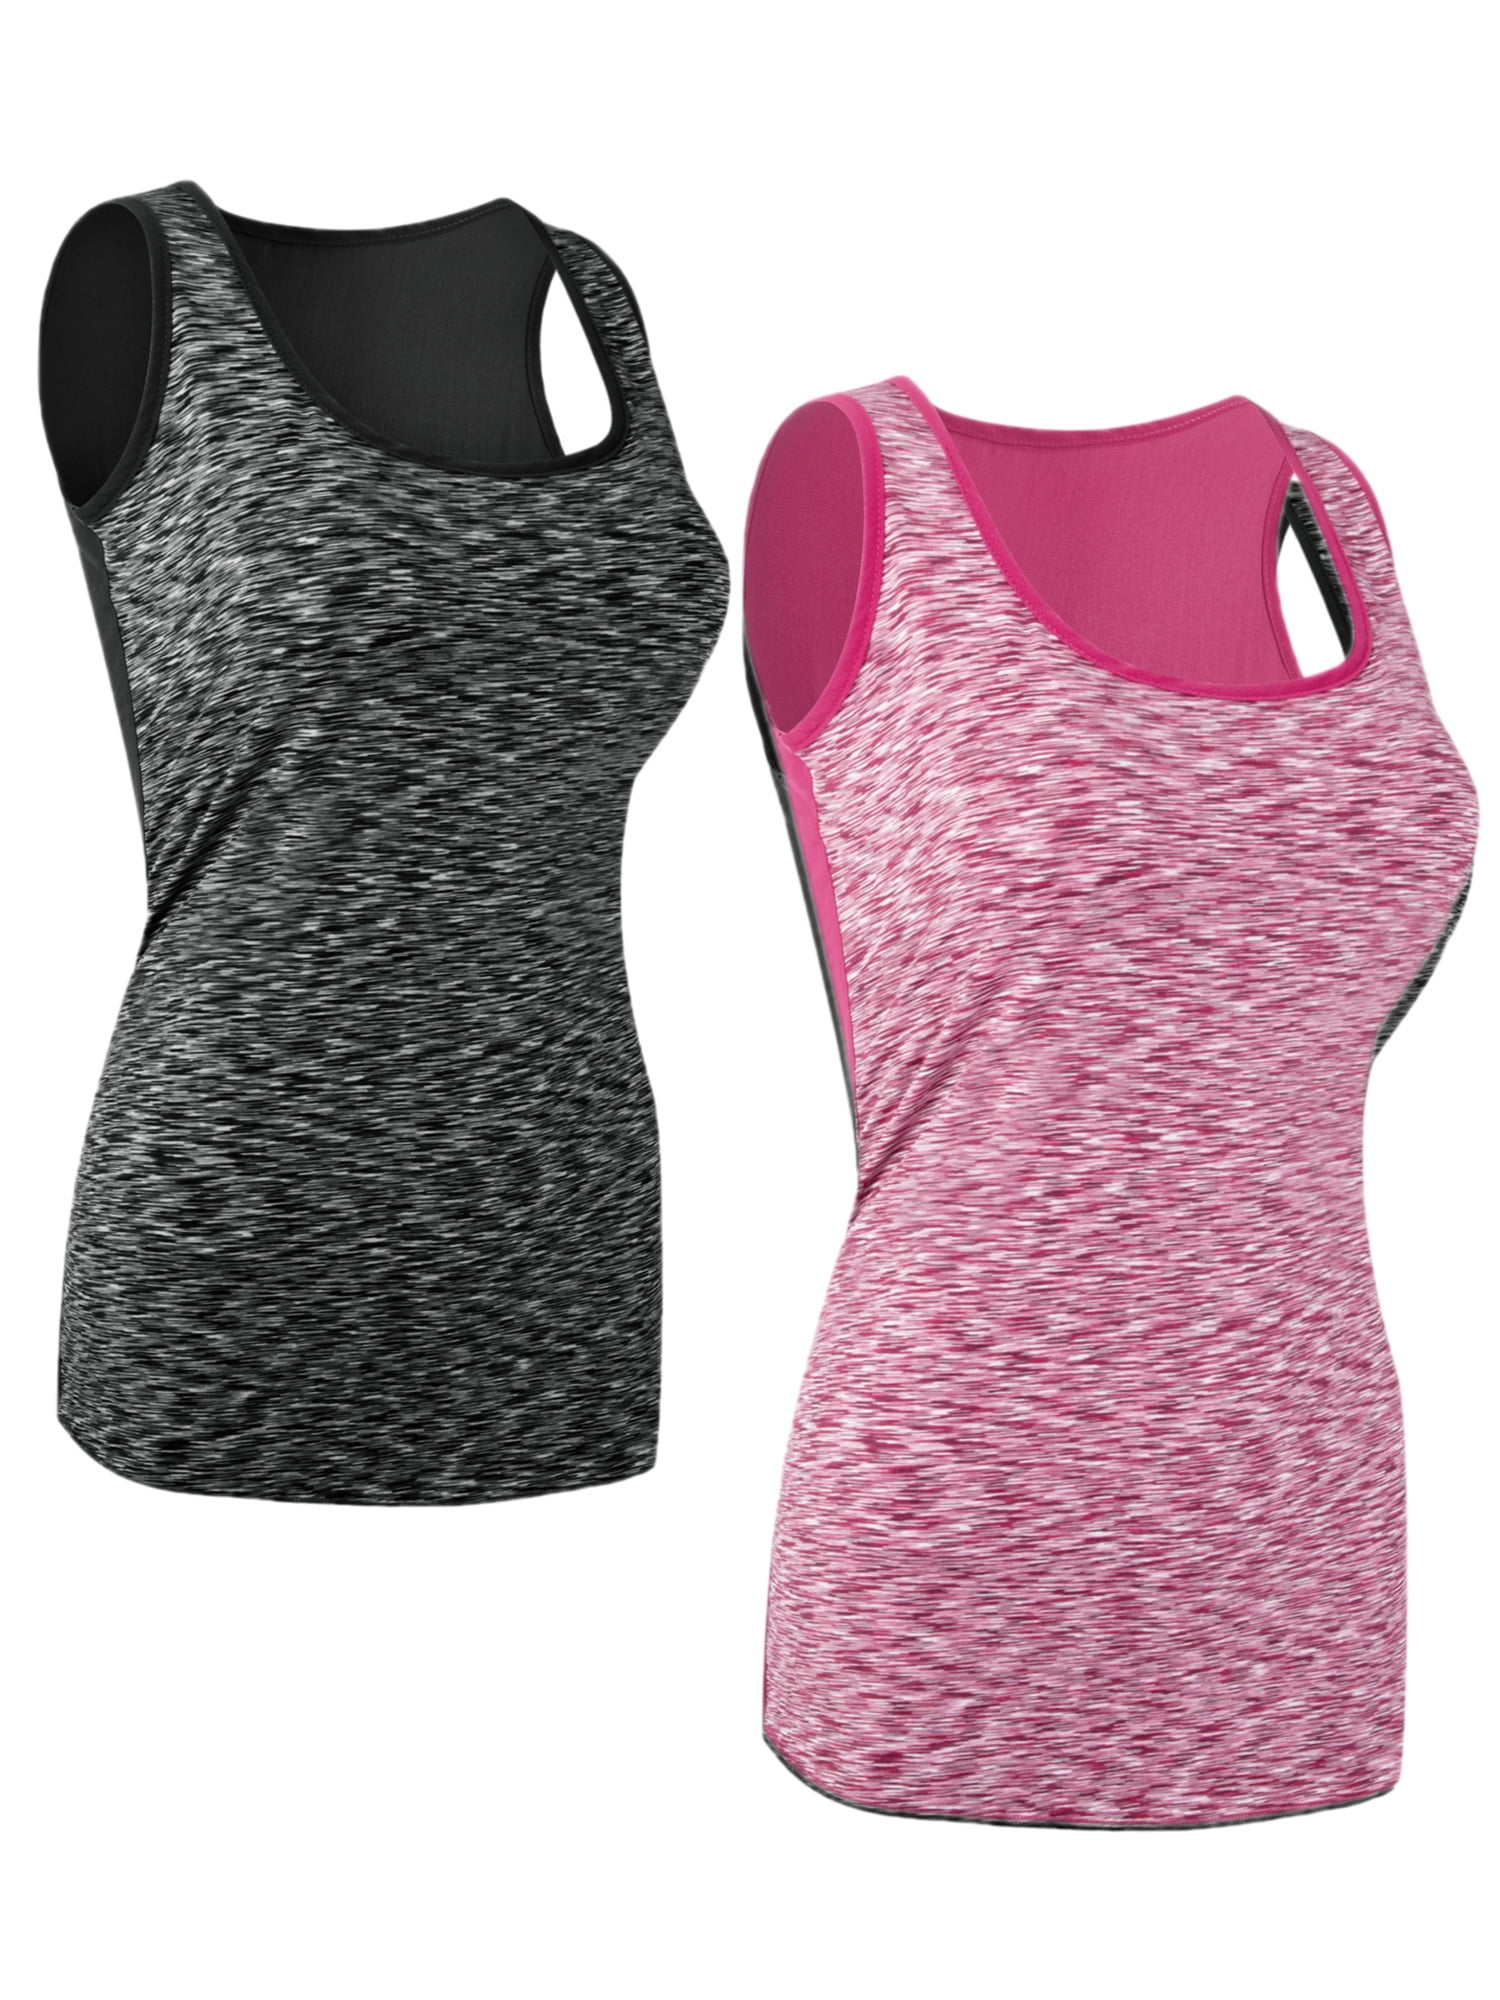 Gym Sleeveless Yoga Shirts Mesh Breathable Sport Tops Womens Workout Tank Tops